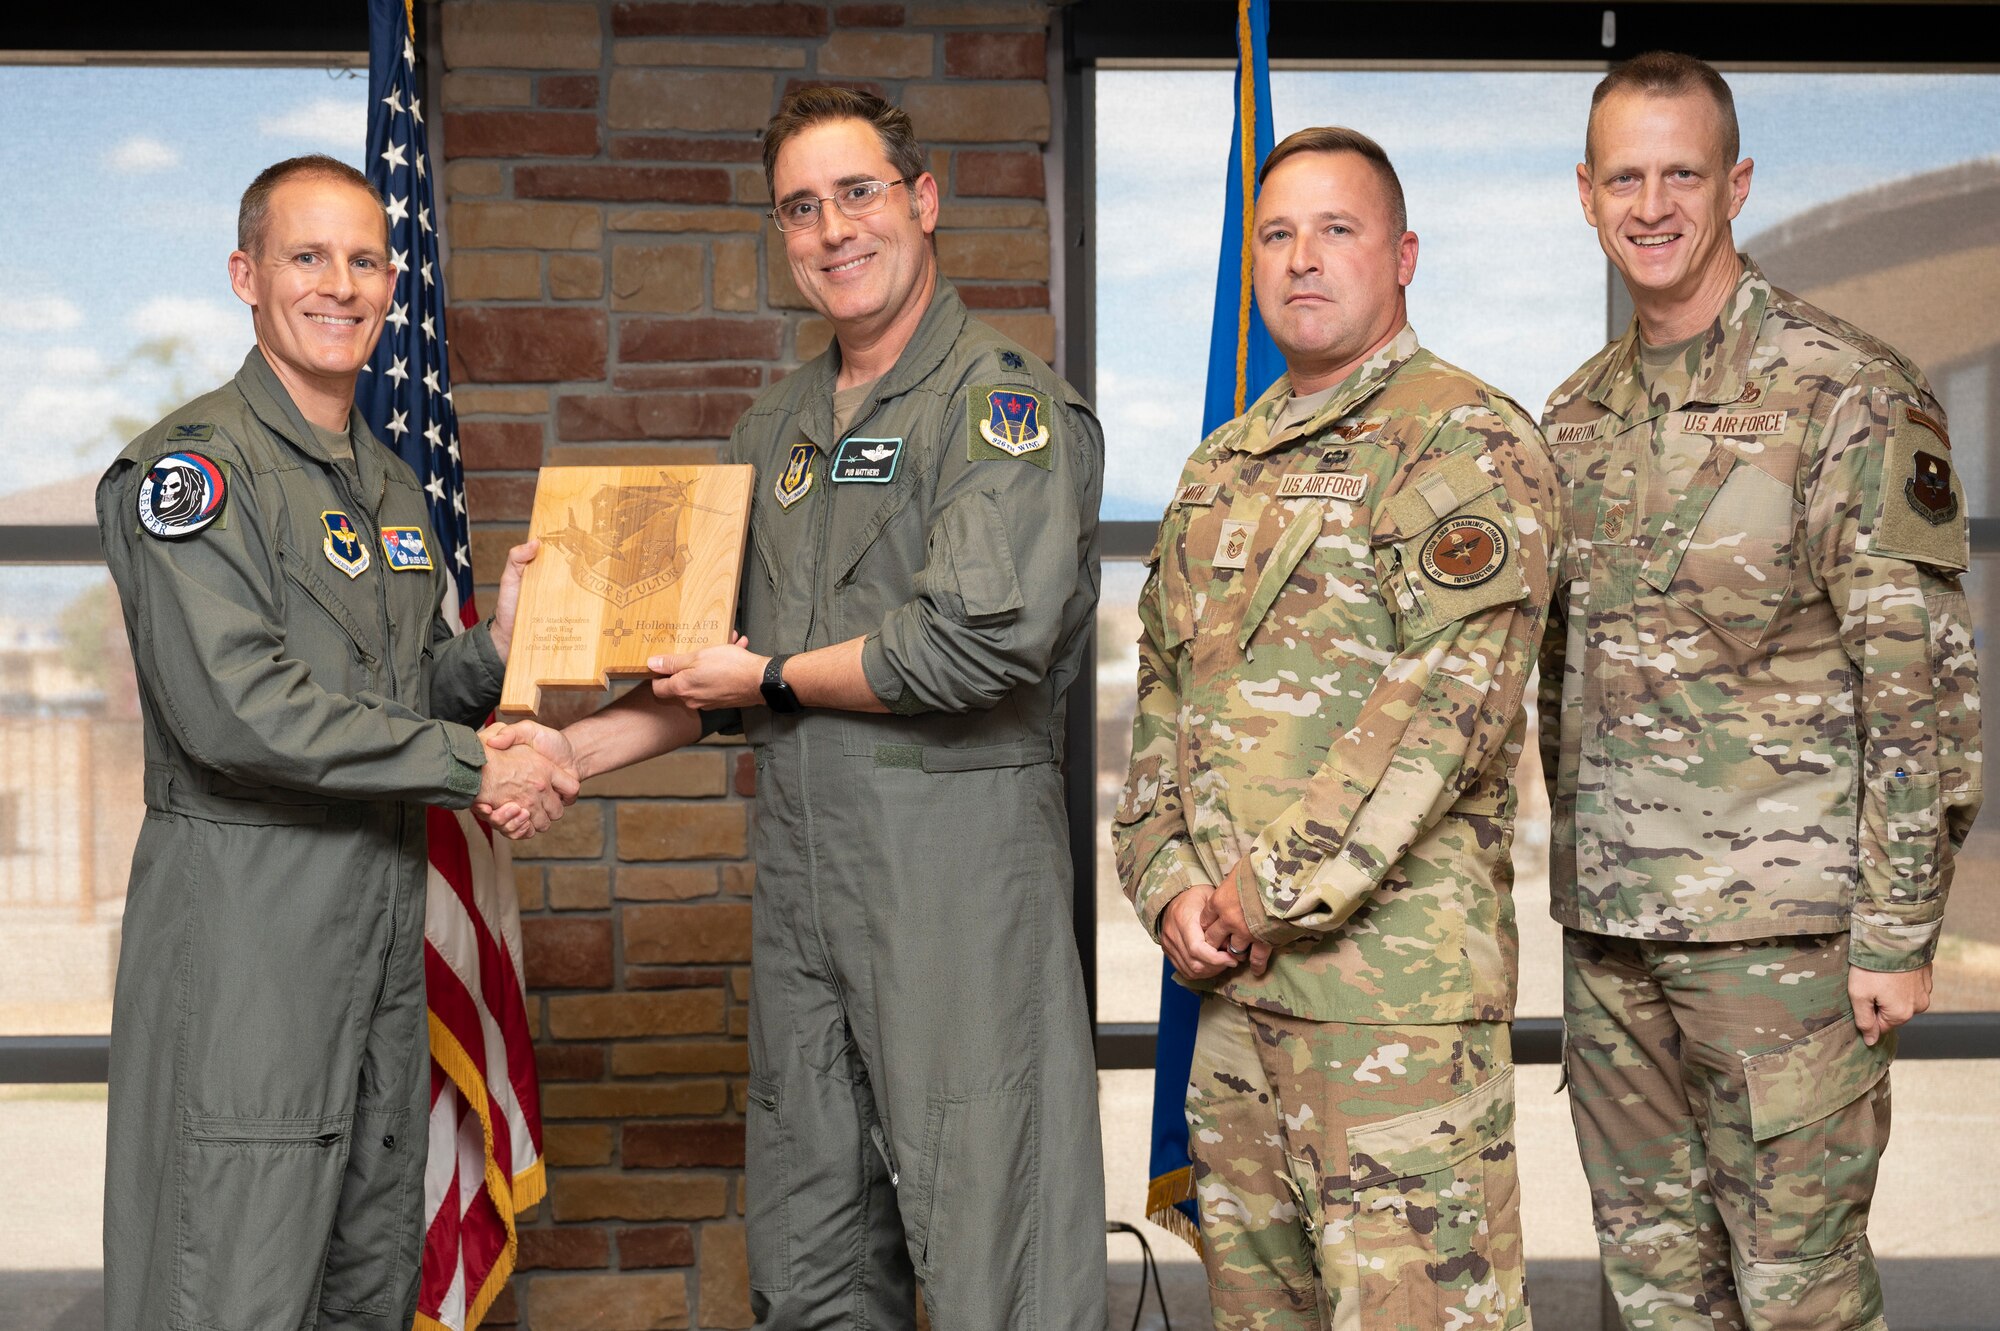 U.S. Air Force Lt. Col. Sean Matthews, left, and U.S. Air Force Senior Master Sgt. Kyle Smith, from the 29th Attack Squadron, accepts the 49th Wing’s Small Unit of the Quarter Award, during the 49th Wing’s 2nd Quarter Award ceremony at Holloman Air Force Base, New Mexico, Aug. 11, 2023. Quarterly award winners were selected based on their technical expertise, demonstration of leadership and job performance. (U.S. Air Force photo by Airman 1st Class Michelle Ferrari)